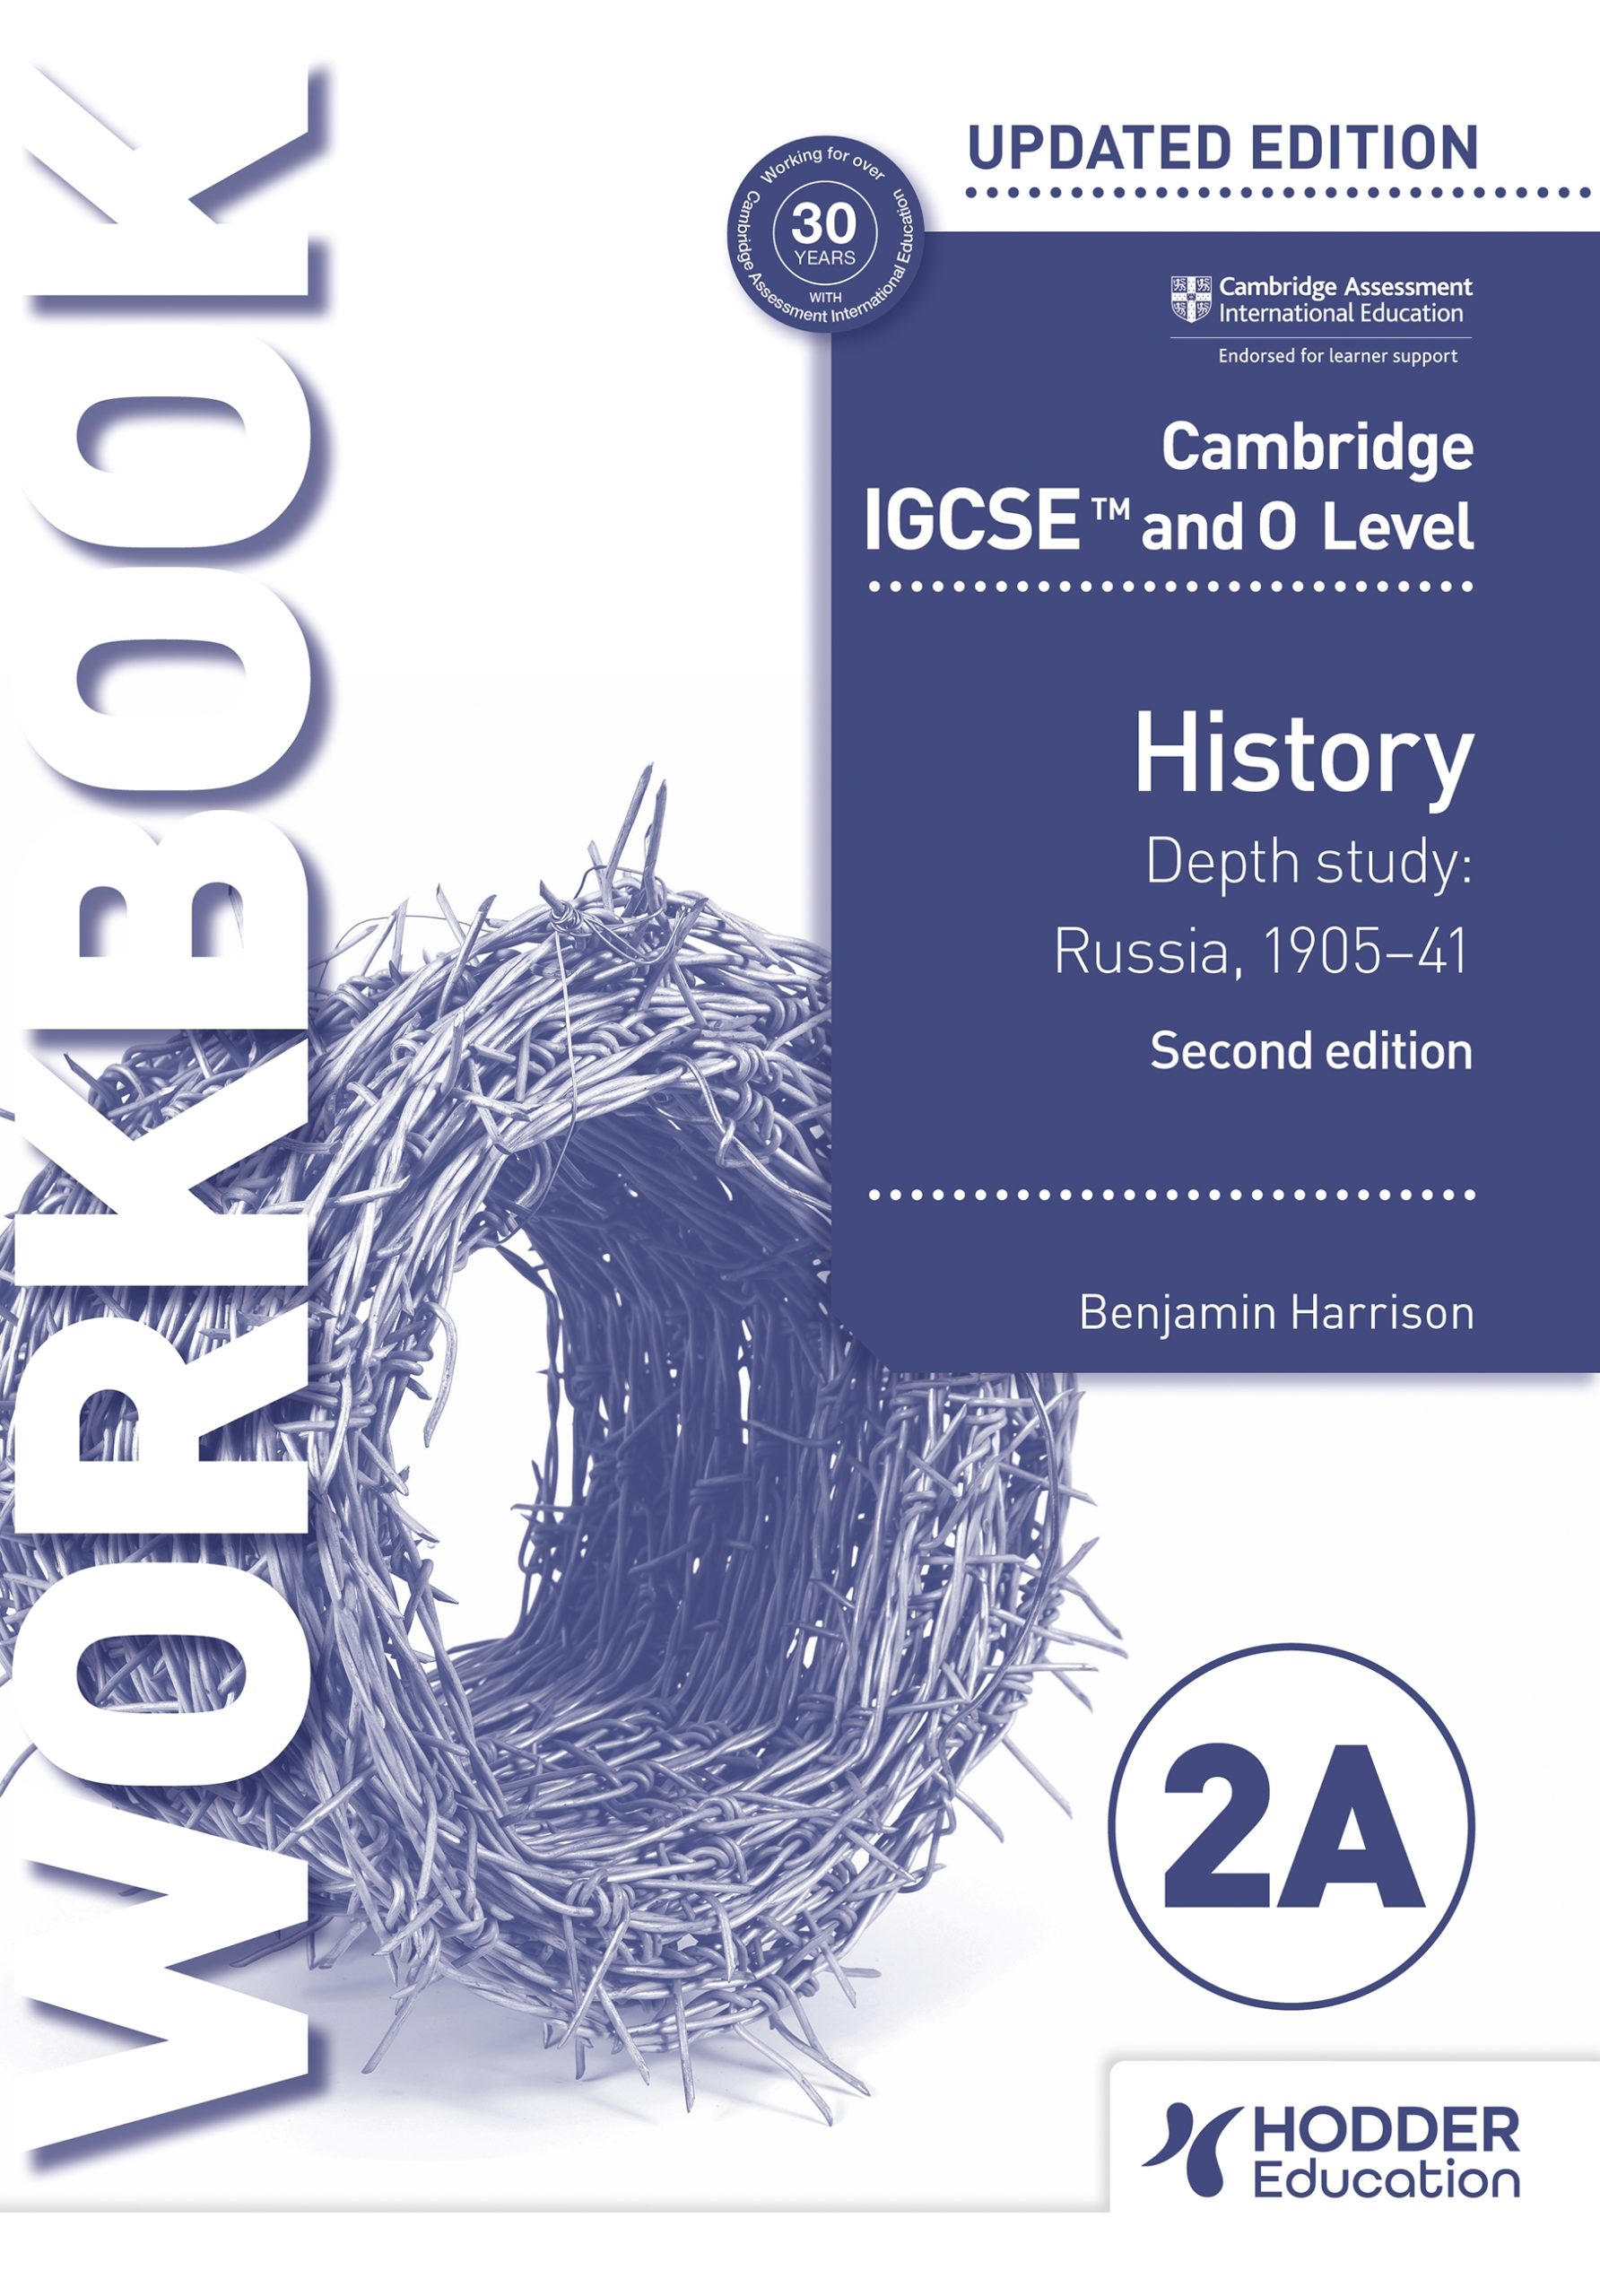 Featured image for “Cambridge IGCSE and O Level History Workbook 2A - Depth study: Russia, 1905–41 2nd Edition”